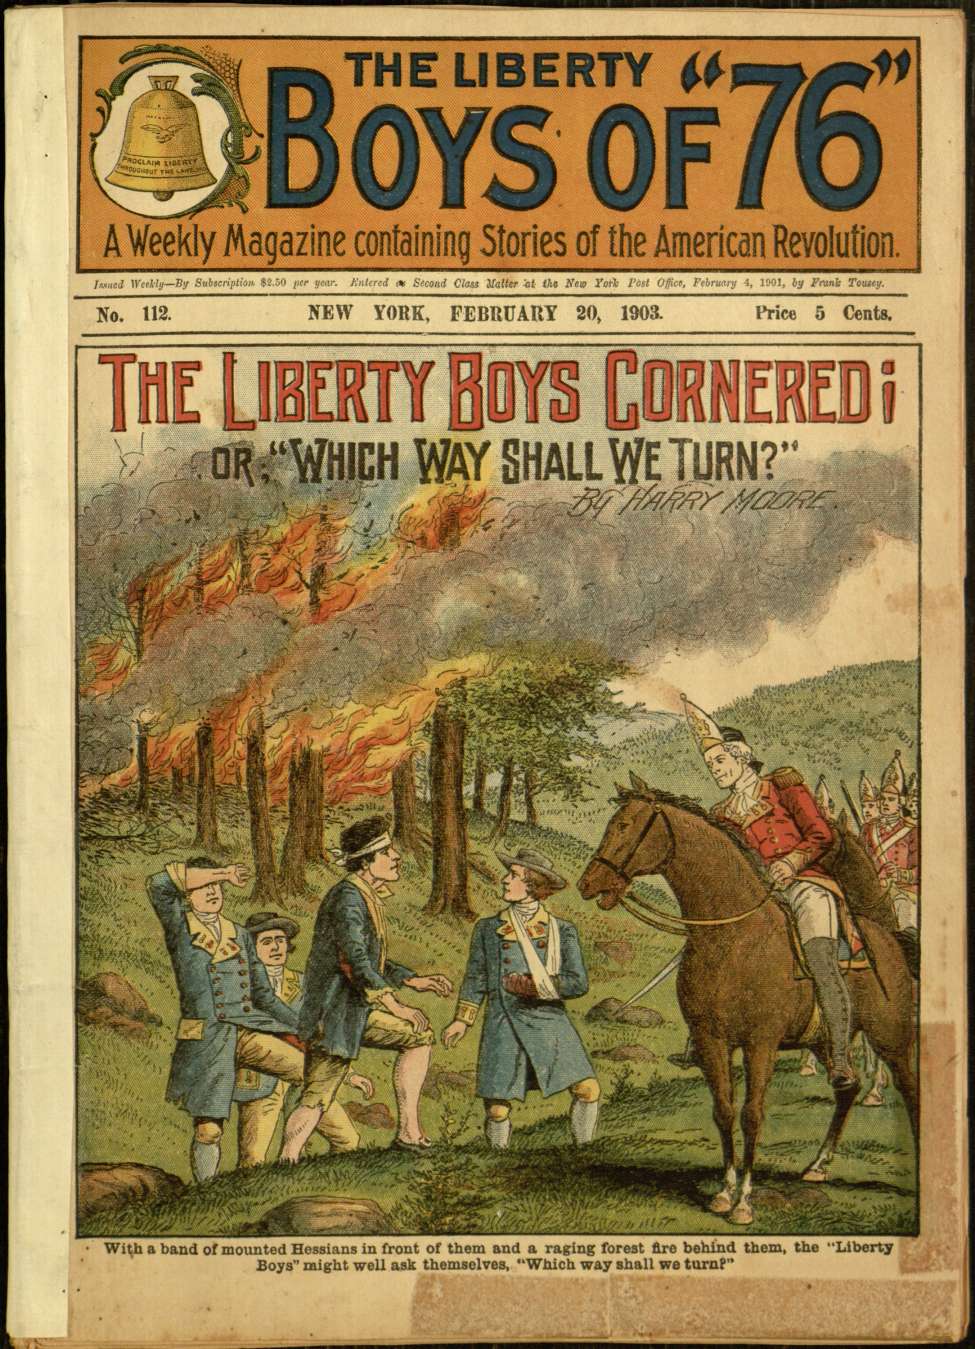 Book Cover For The Liberty Boys of 76 - 112 The Liberty Boys Cornered!